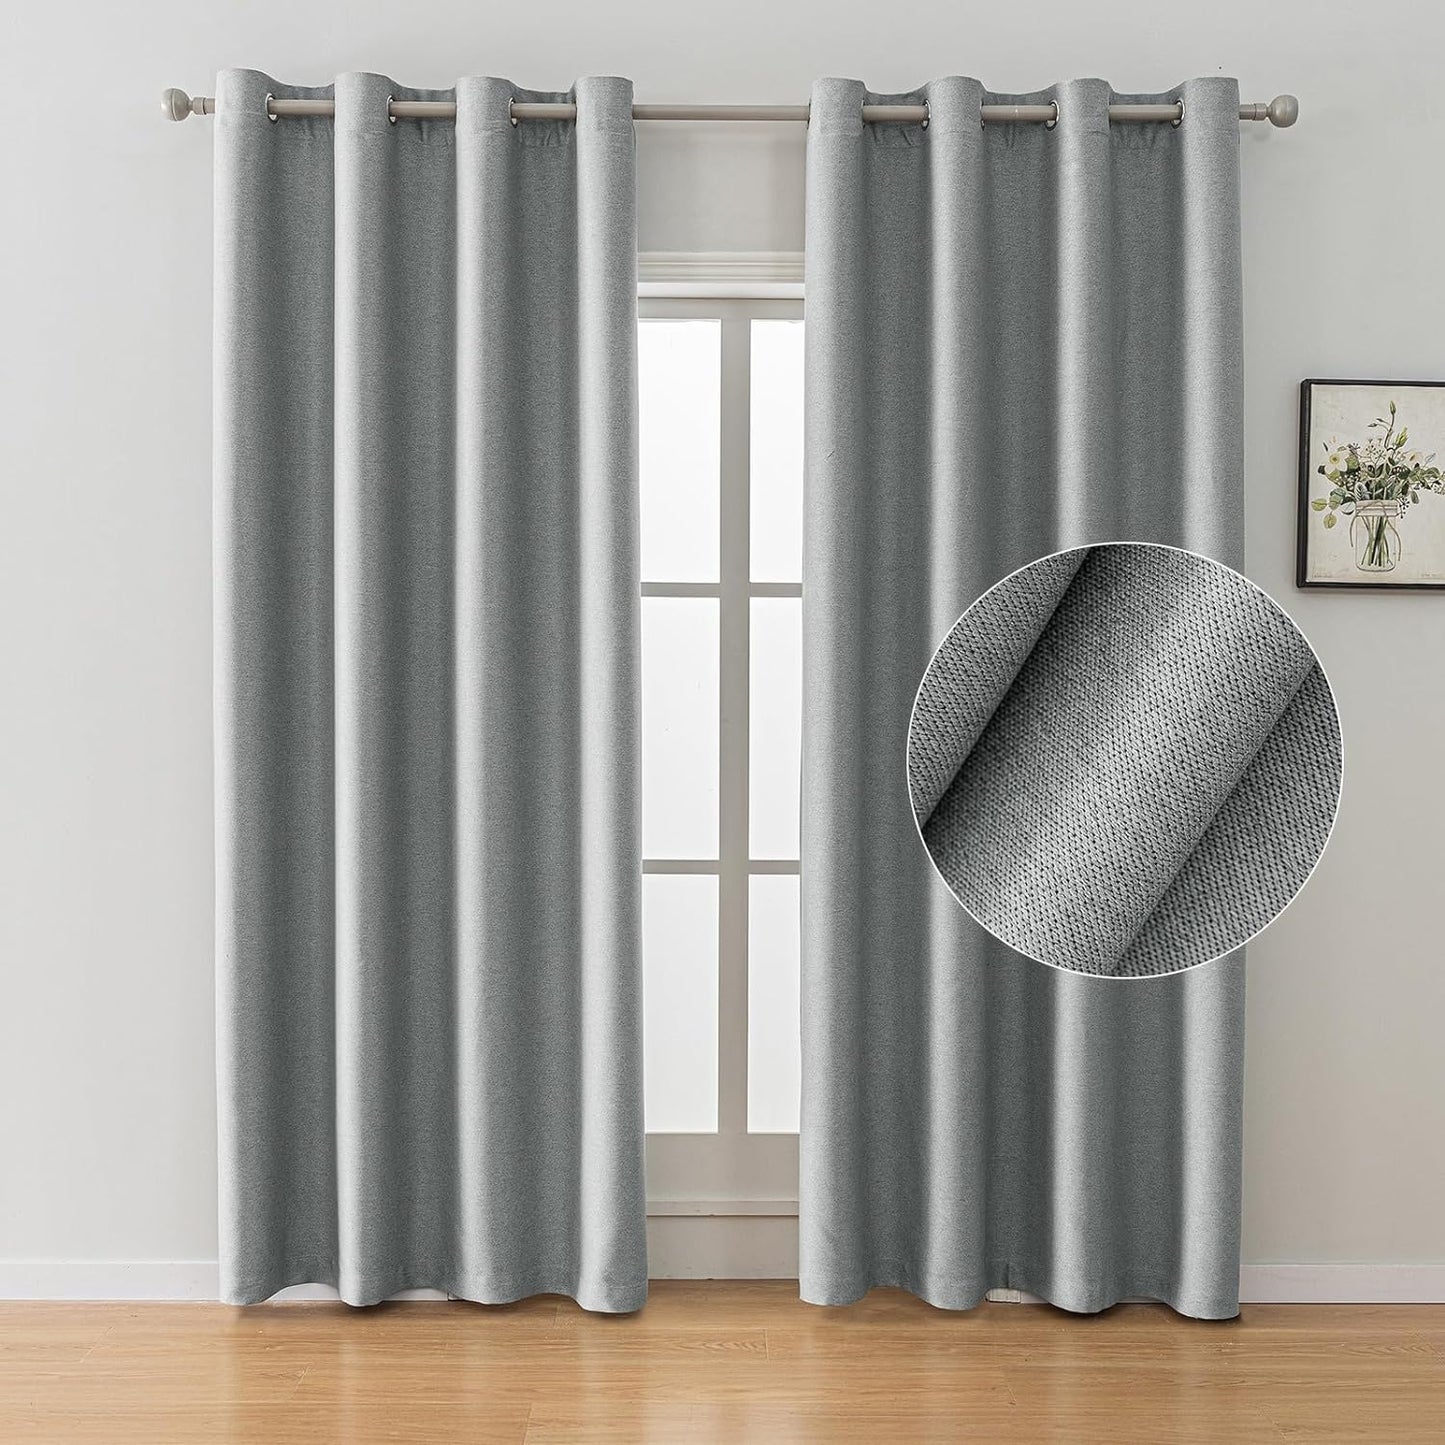 SYSLOON Natural Linen Curtains 72 Inch Length 2 Panels Set,Blackout Curtains for Bedroom Grommet,Thermal Insulated Room Darkening Curtains for Living Room,Long Drapes 42"X72",Beige  SYSLOON Light Gray 52X96In （W X L） 